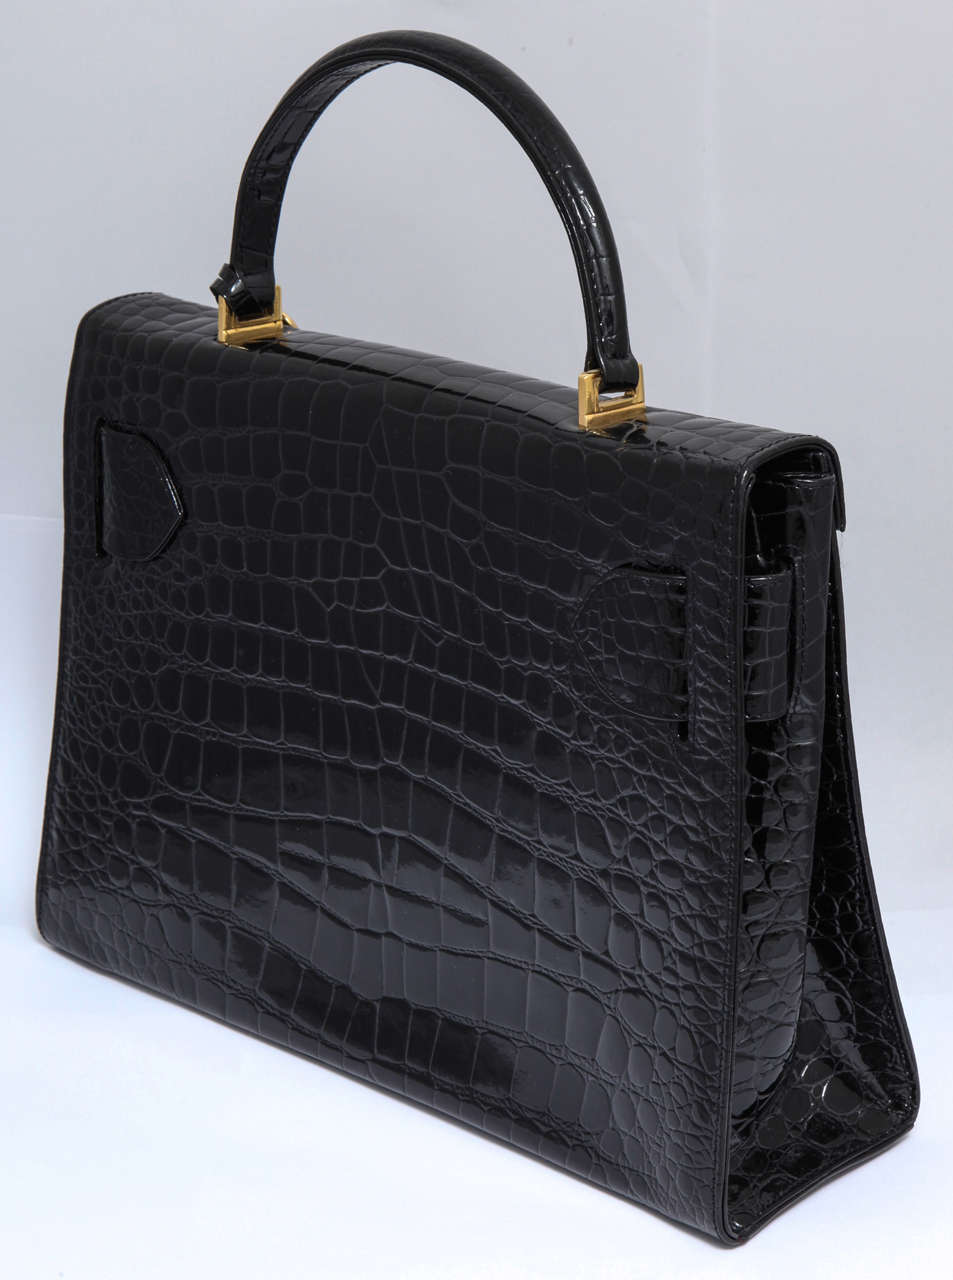 Women's Gianni Versace Croc Embossed Couture Bag With Medusas For Sale